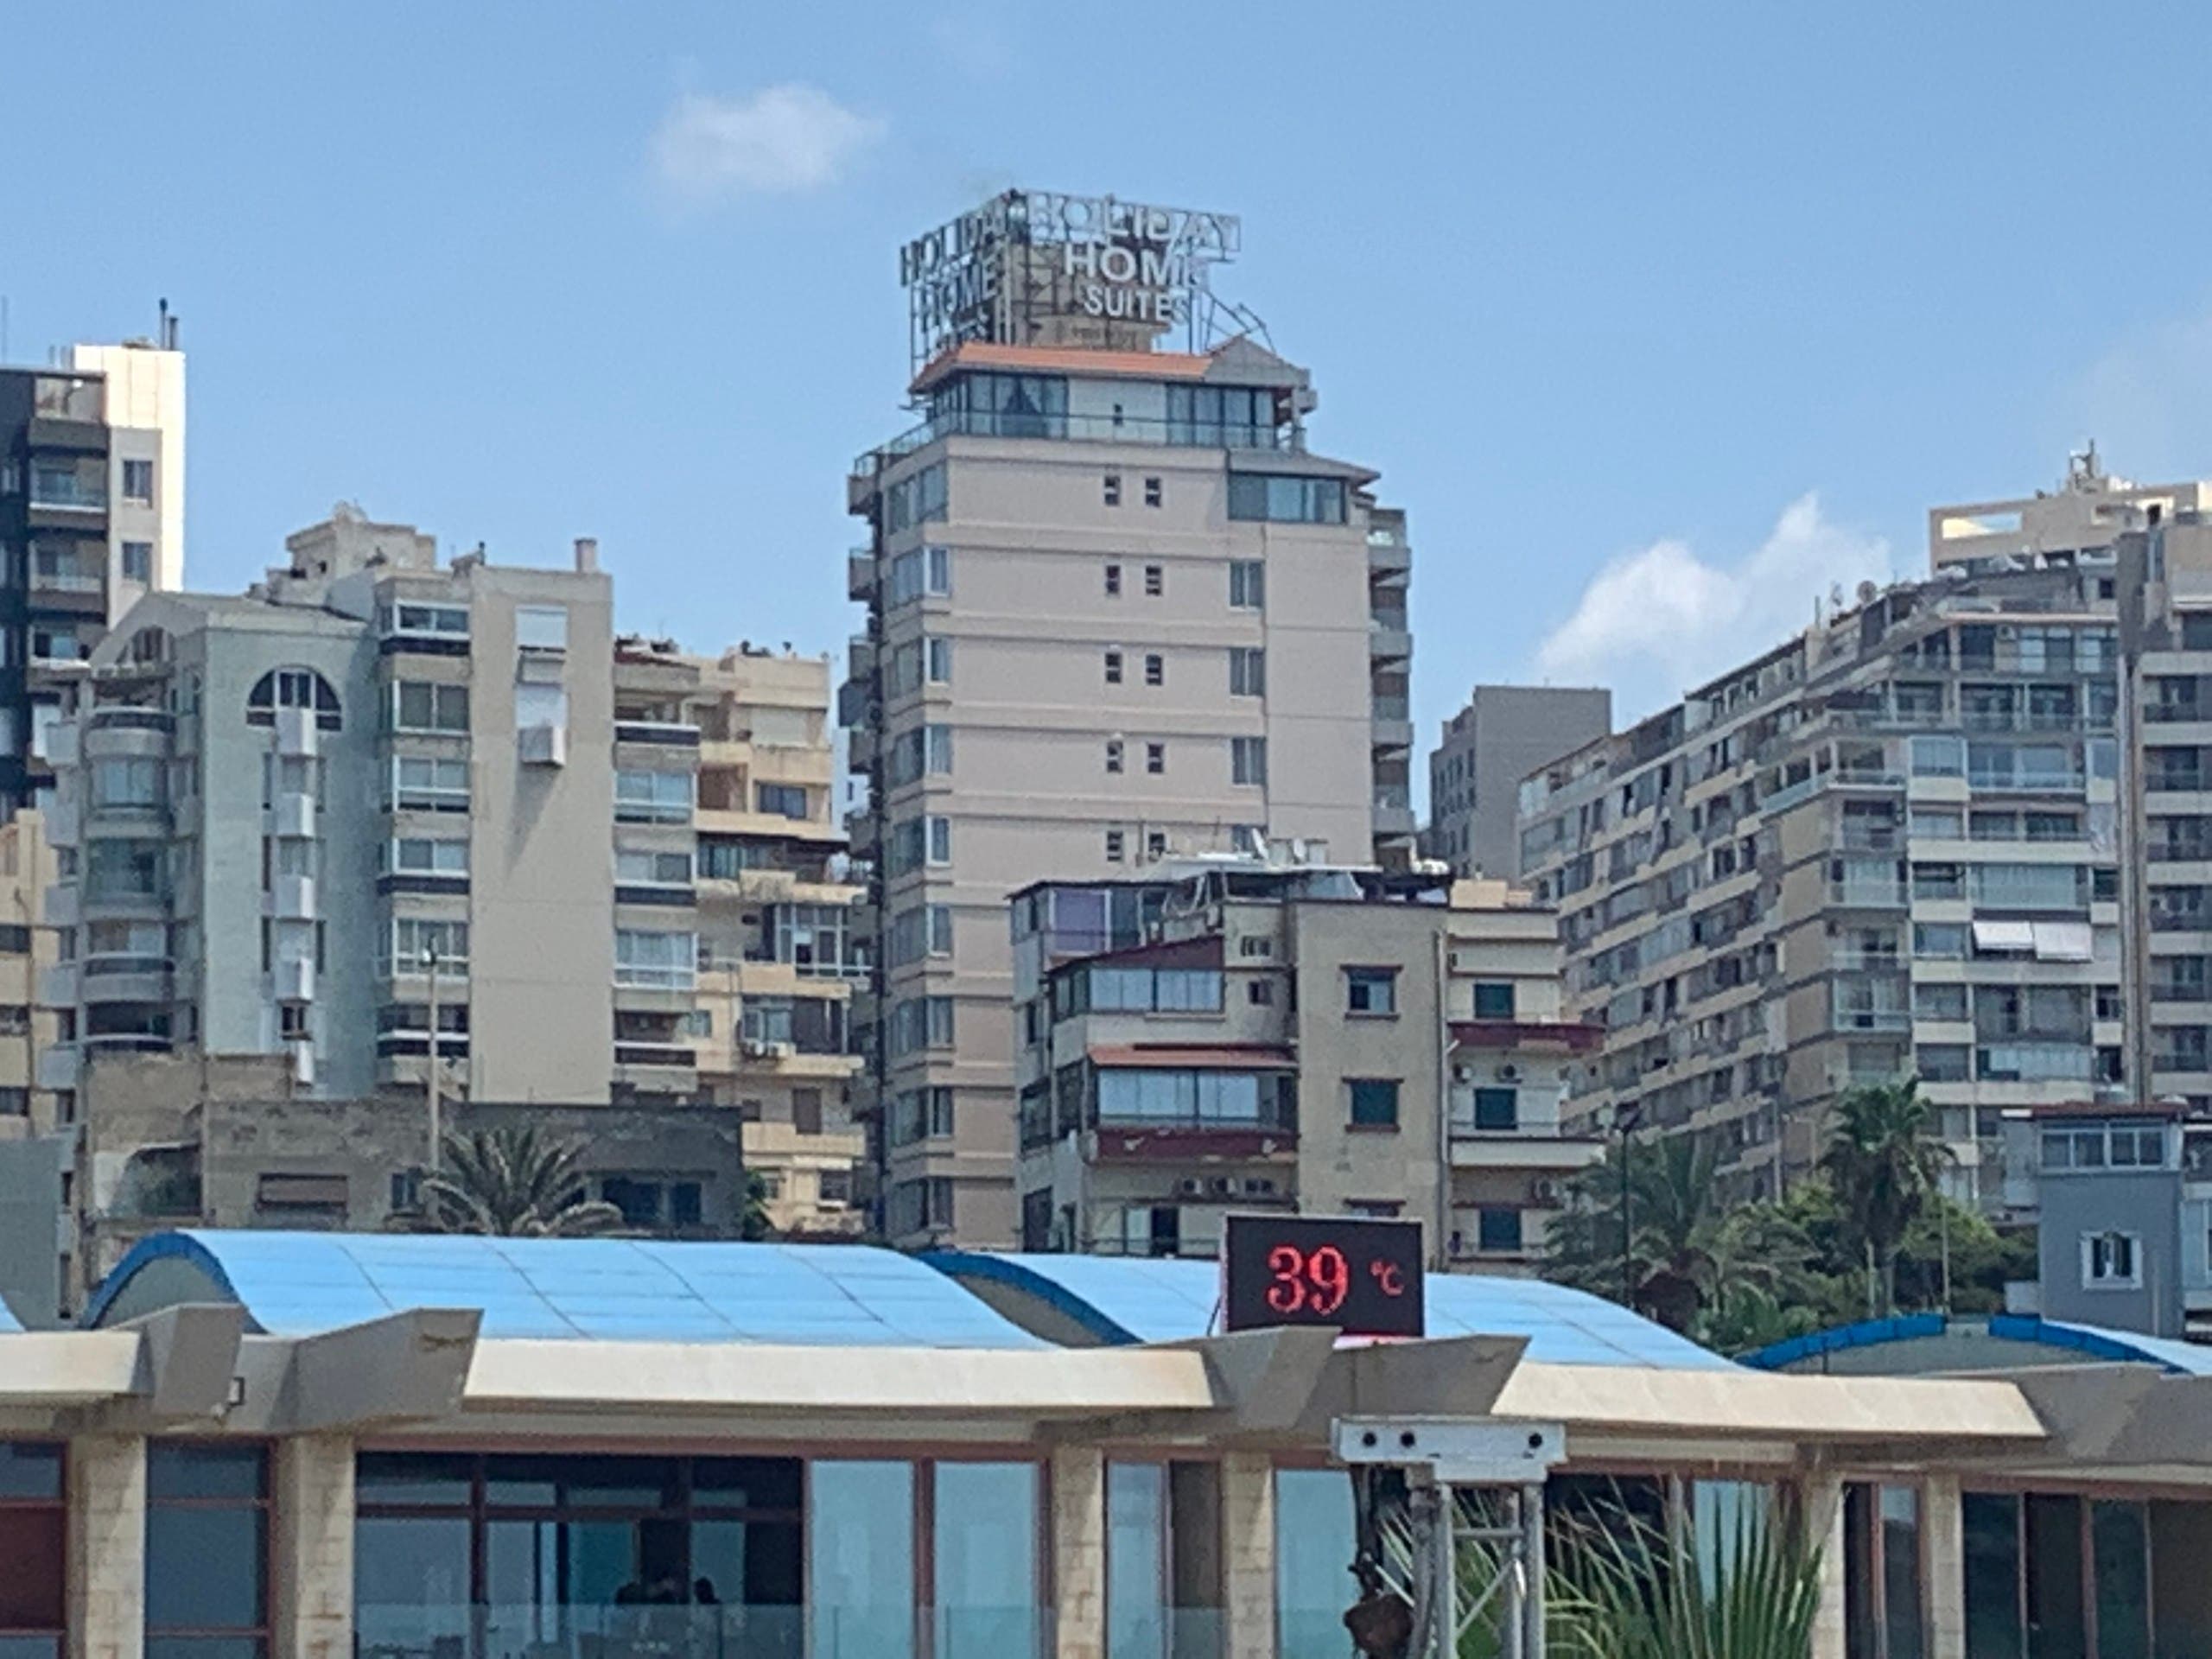 With the public lacking electricity, medicine, water and fuel, the public’s health is at risk as temperatures hit up to 40 degrees Celsius. (Image: Reem Khamis)